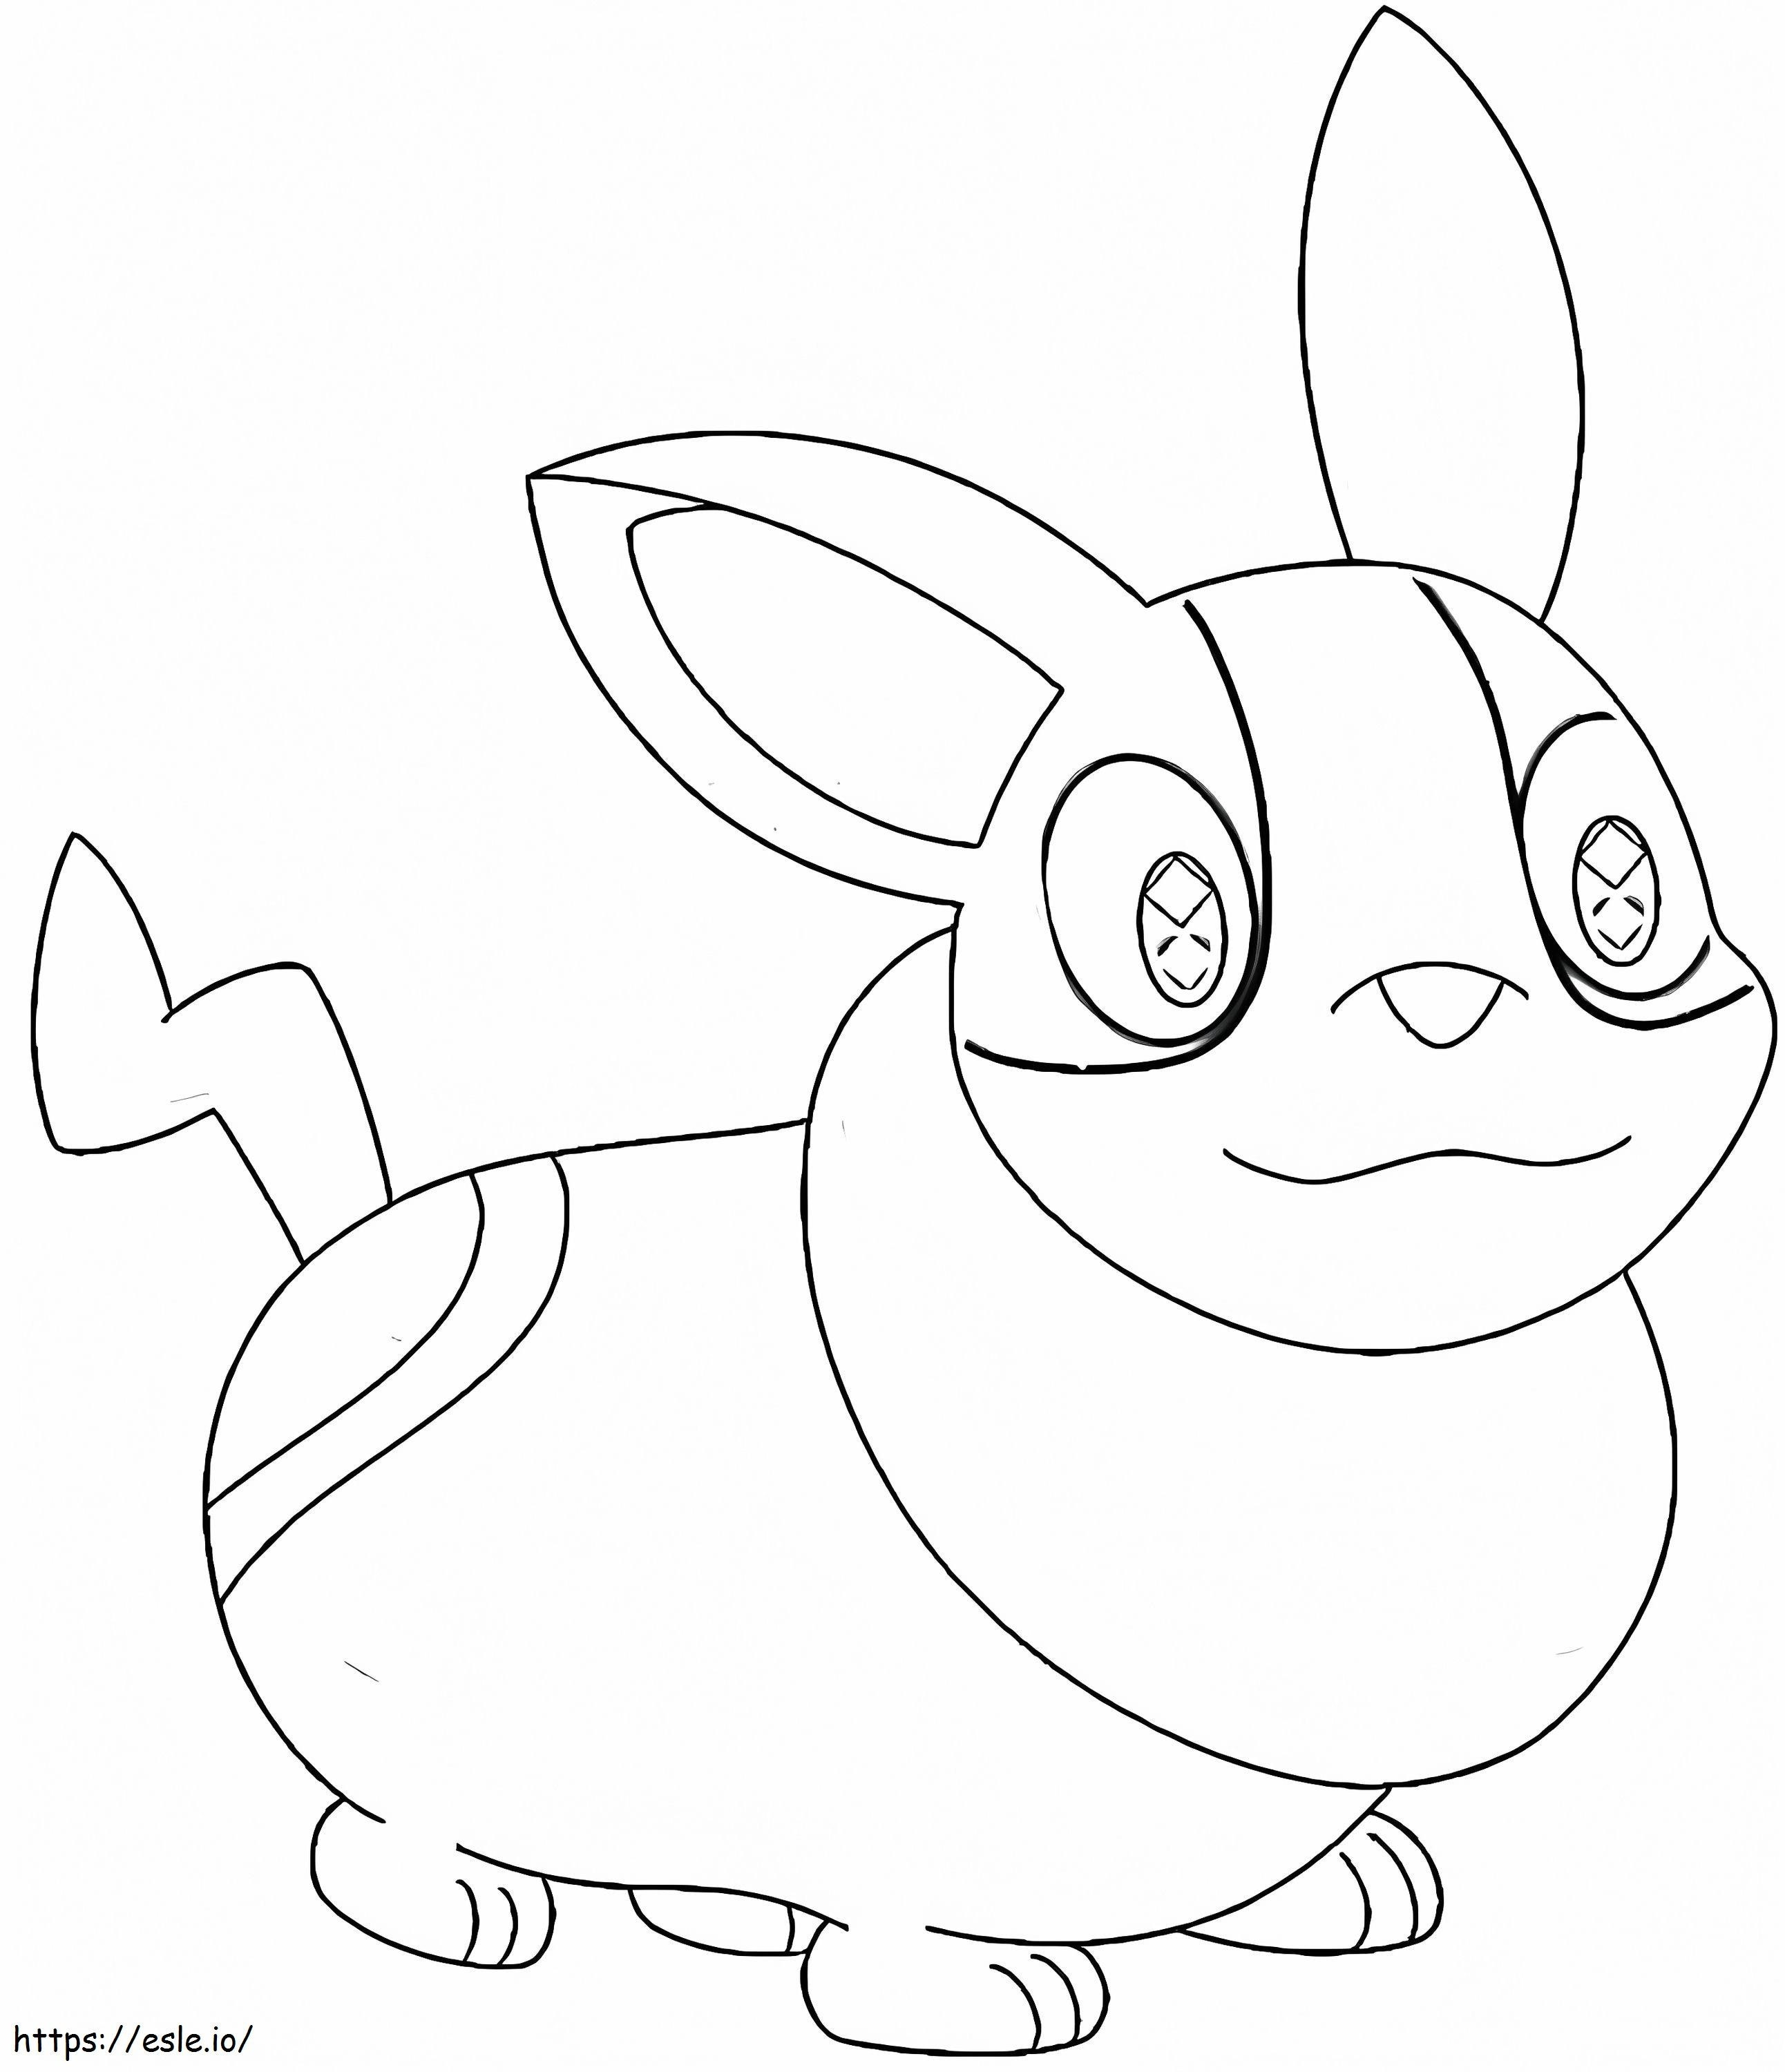 Cute Yamper coloring page